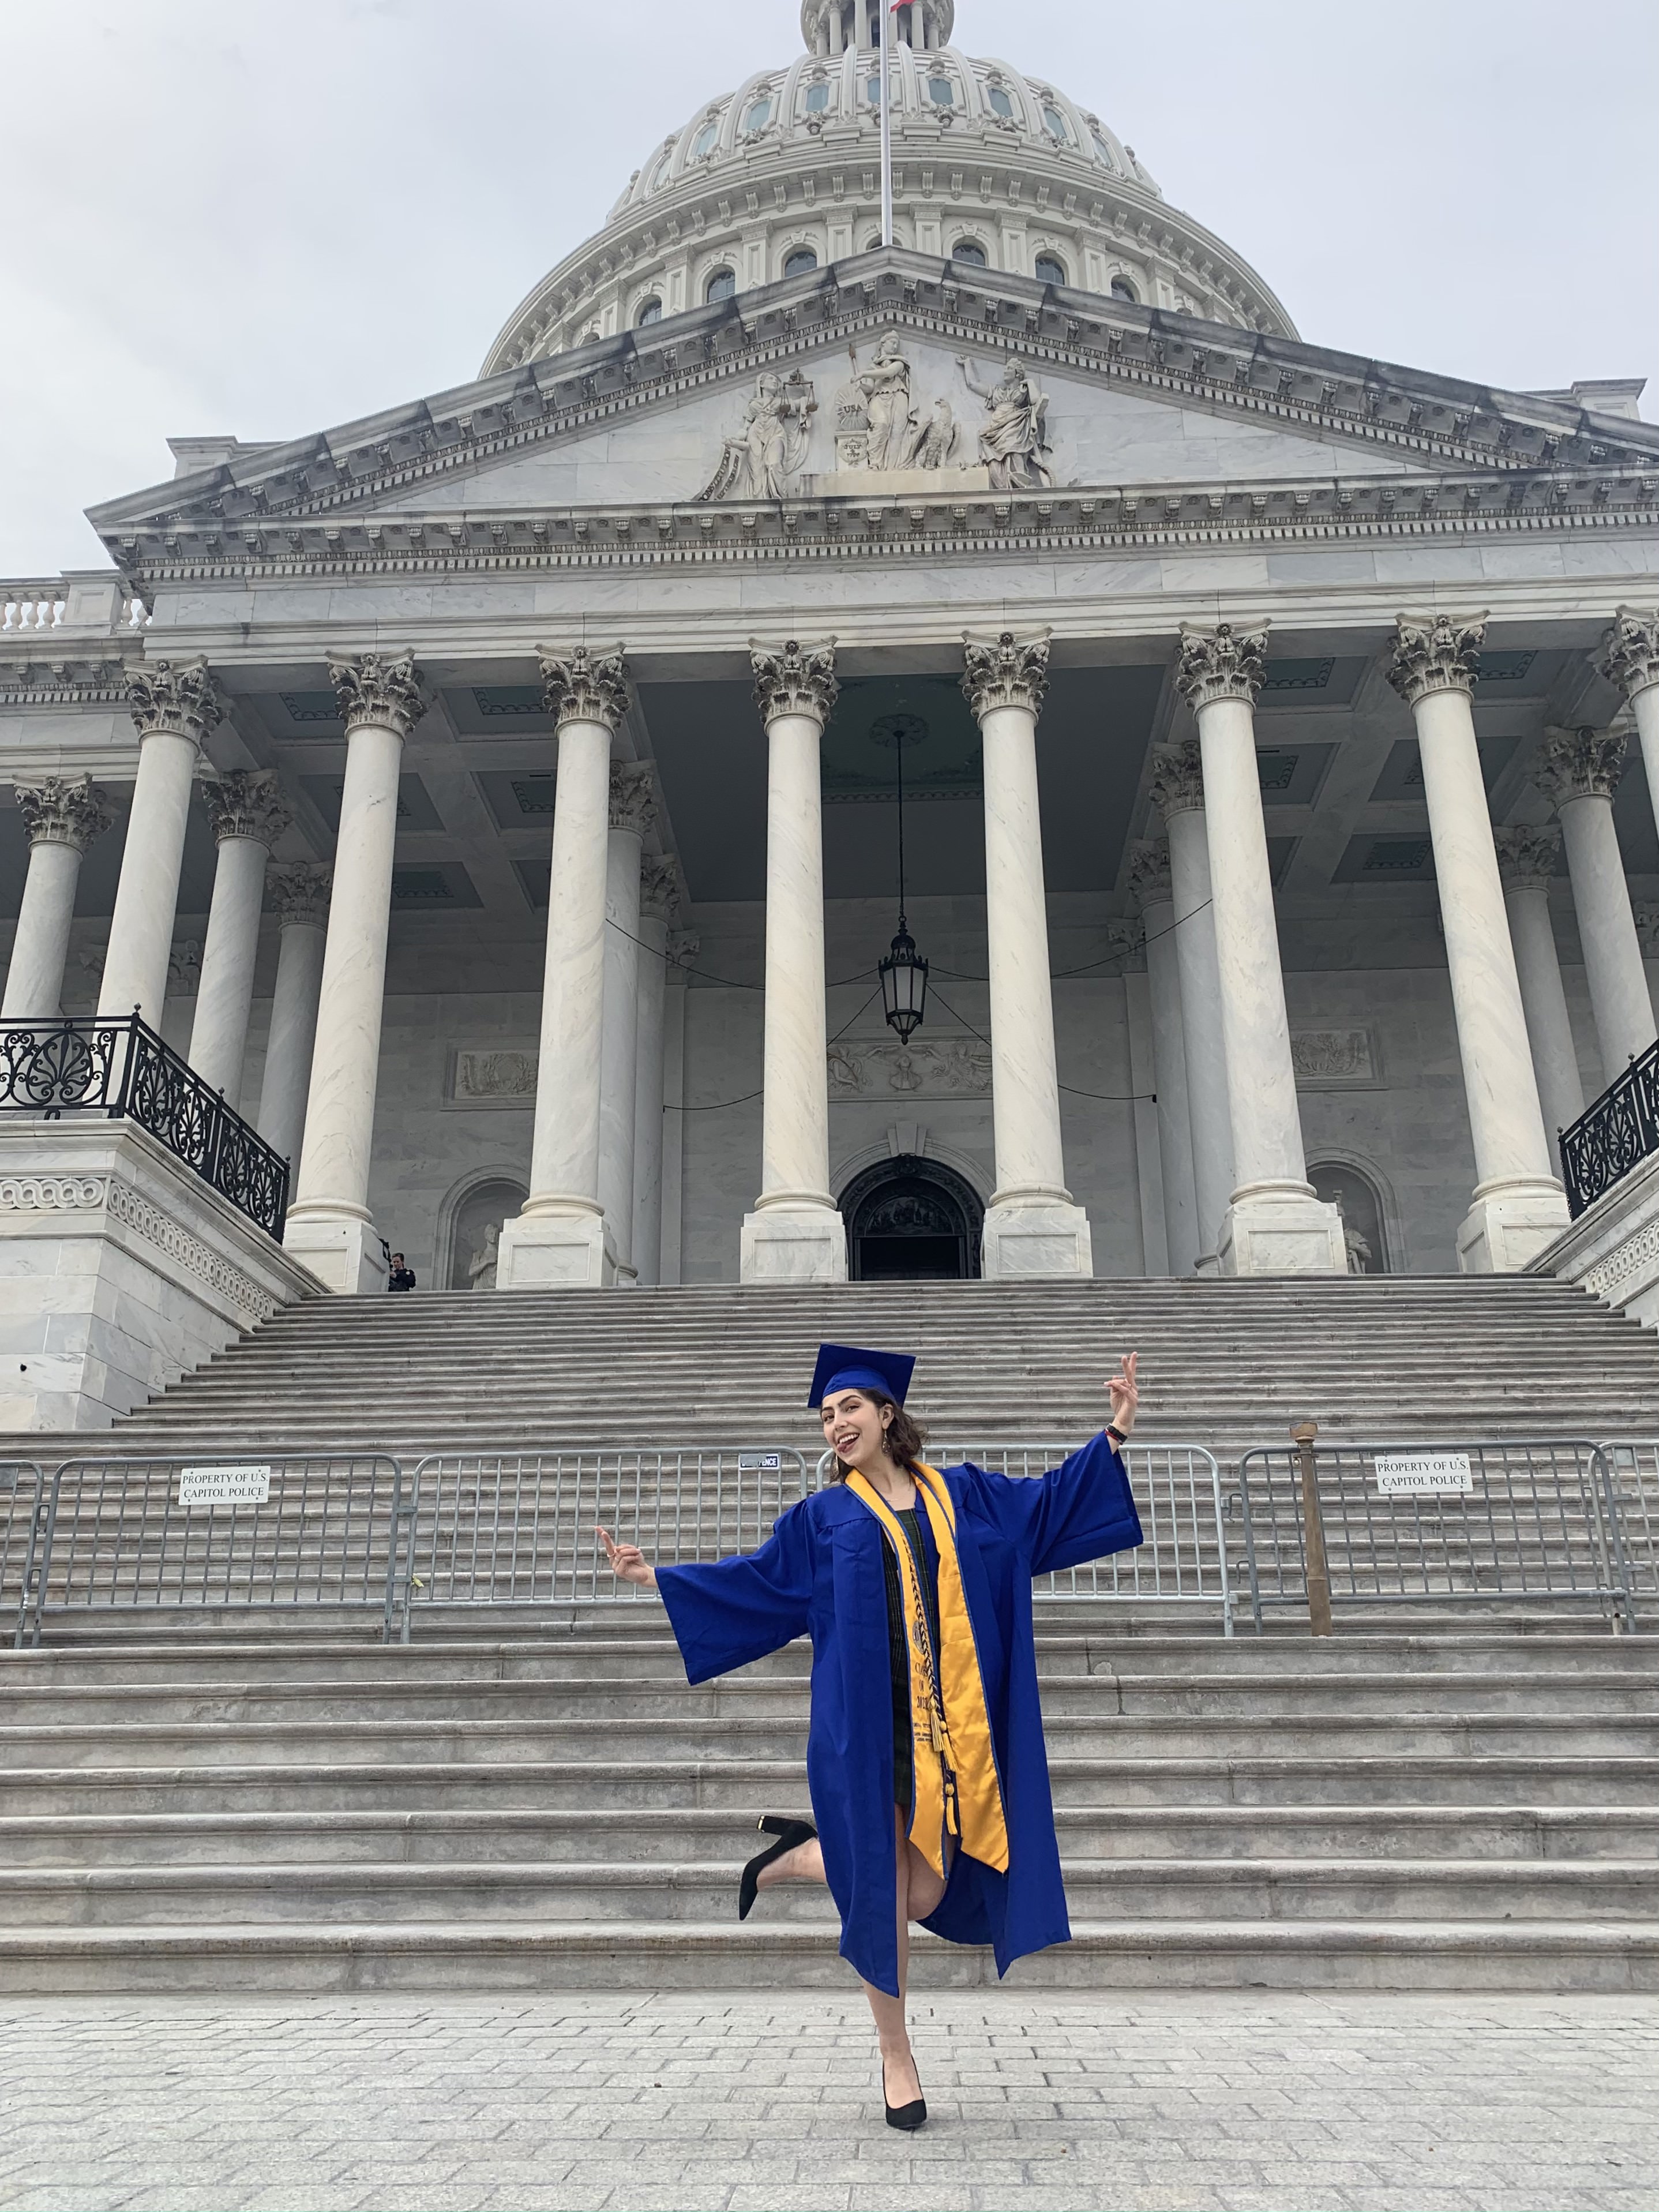 Photo of Liliana in a graduation cap and gown posing in front of the U.S. Supreme Court Building